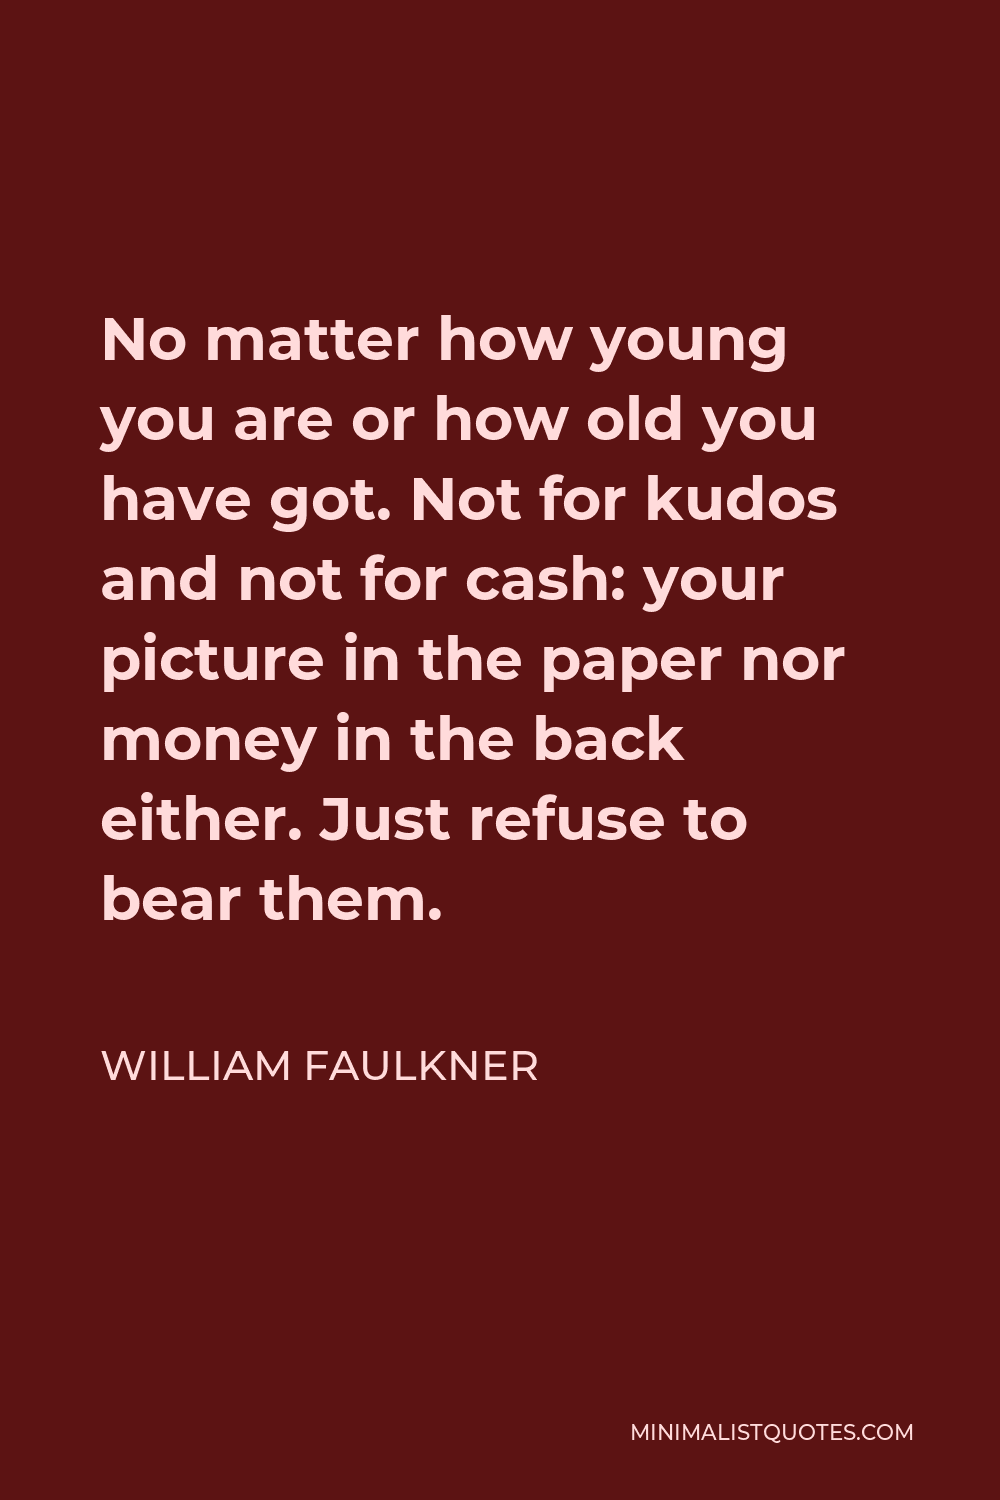 William Faulkner Quote - No matter how young you are or how old you have got. Not for kudos and not for cash: your picture in the paper nor money in the back either. Just refuse to bear them.